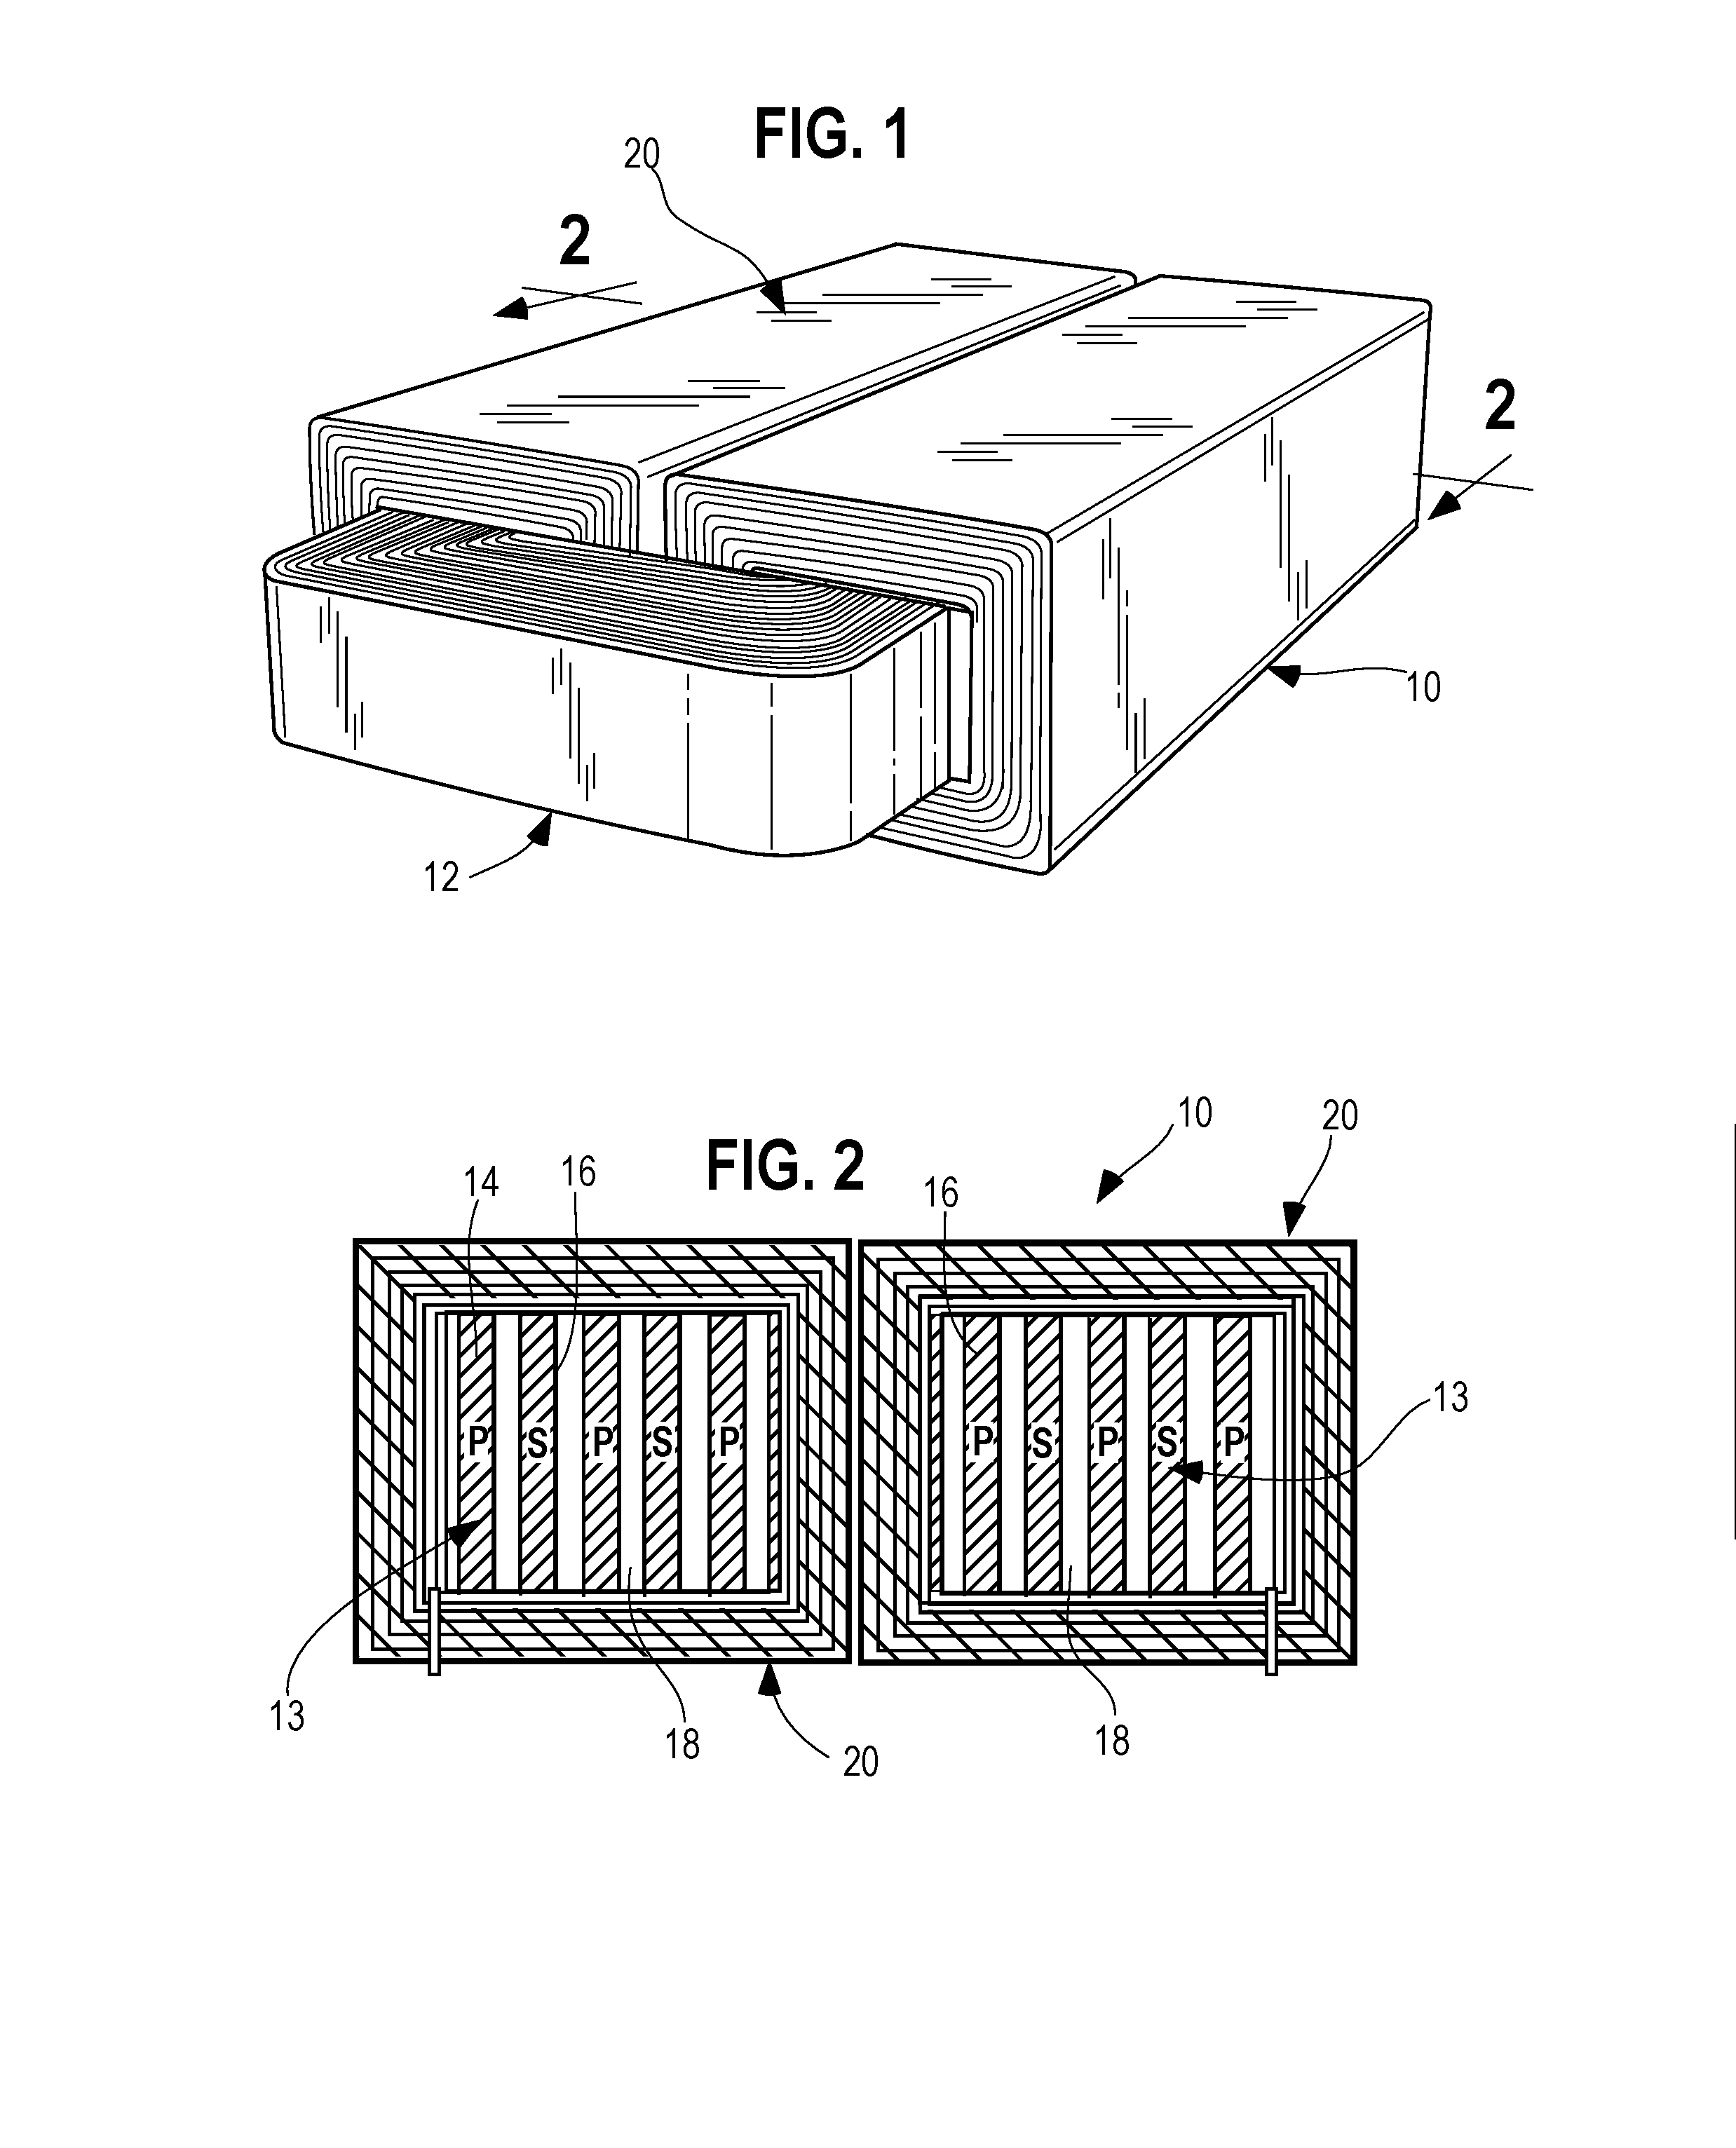 Electromagnetic device having layered magnetic material components and methods for making same